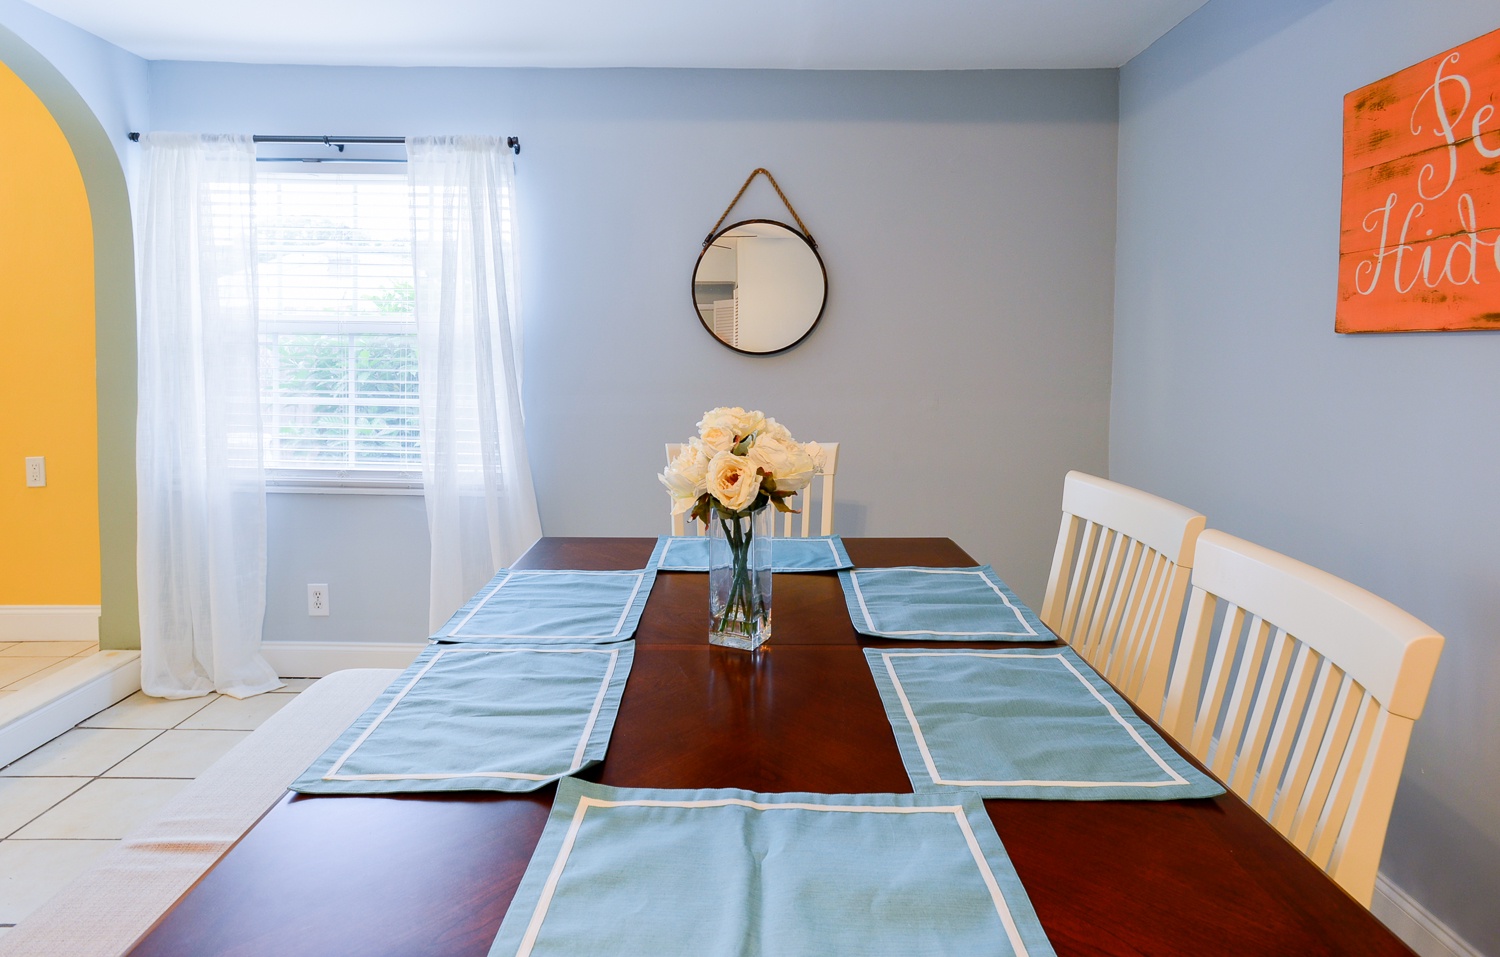 Dining table is in a separate dining room - seats 8